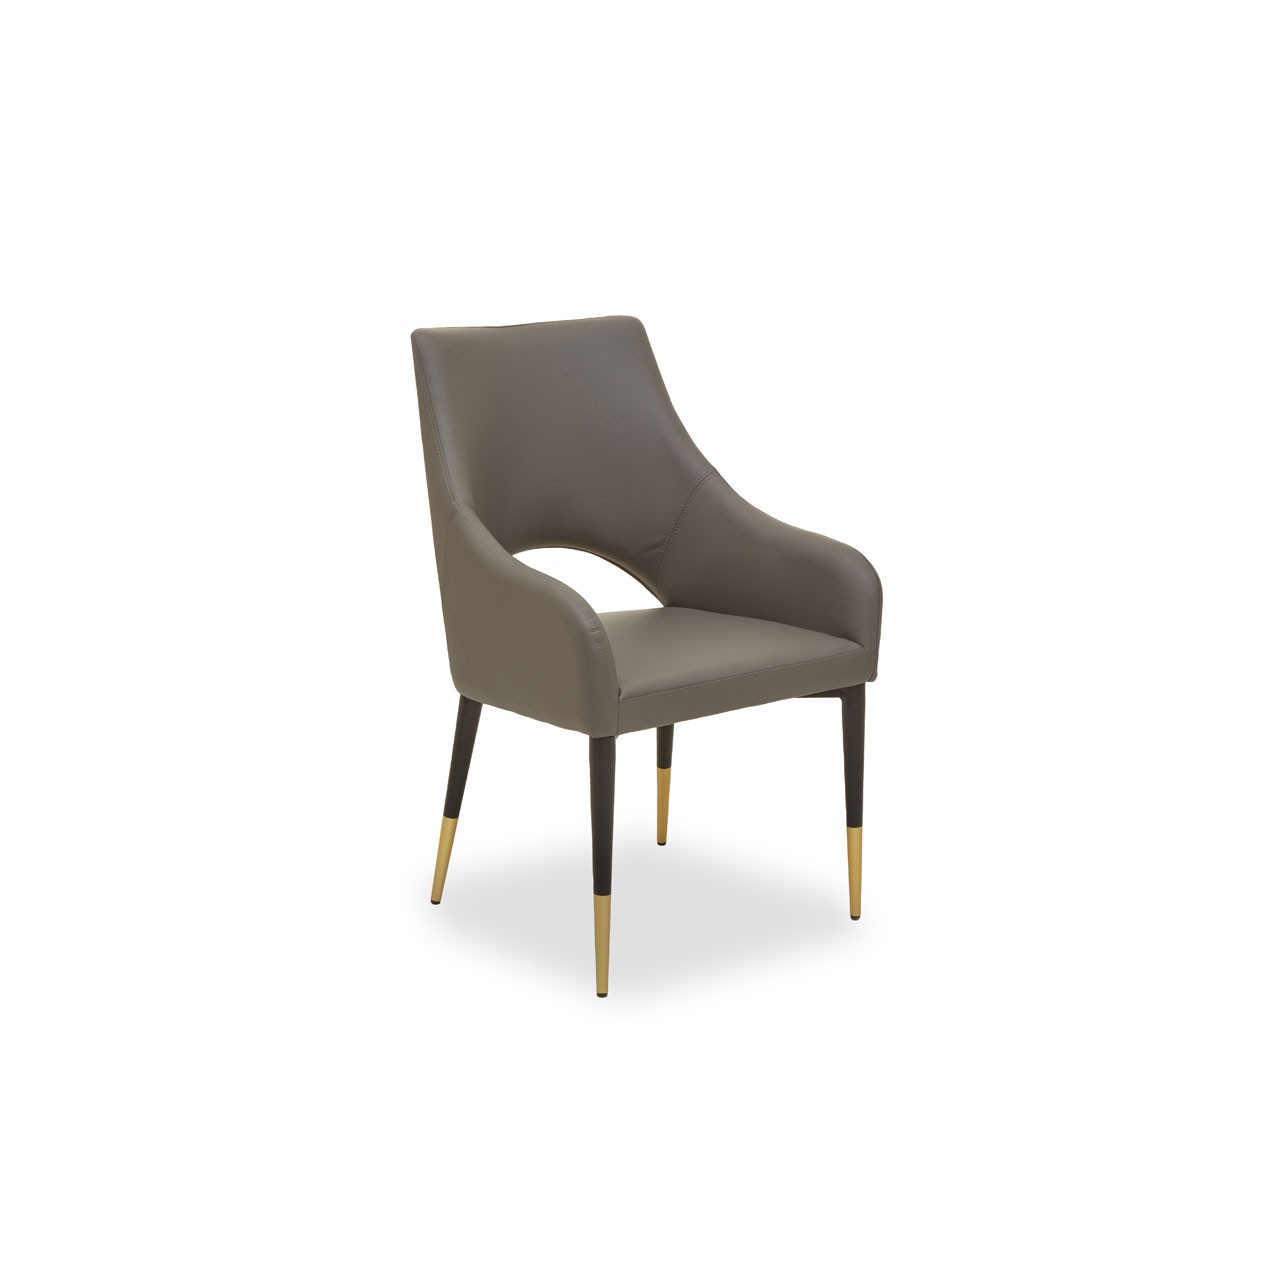 Gilberta Grey Leather Effect Dining Chair